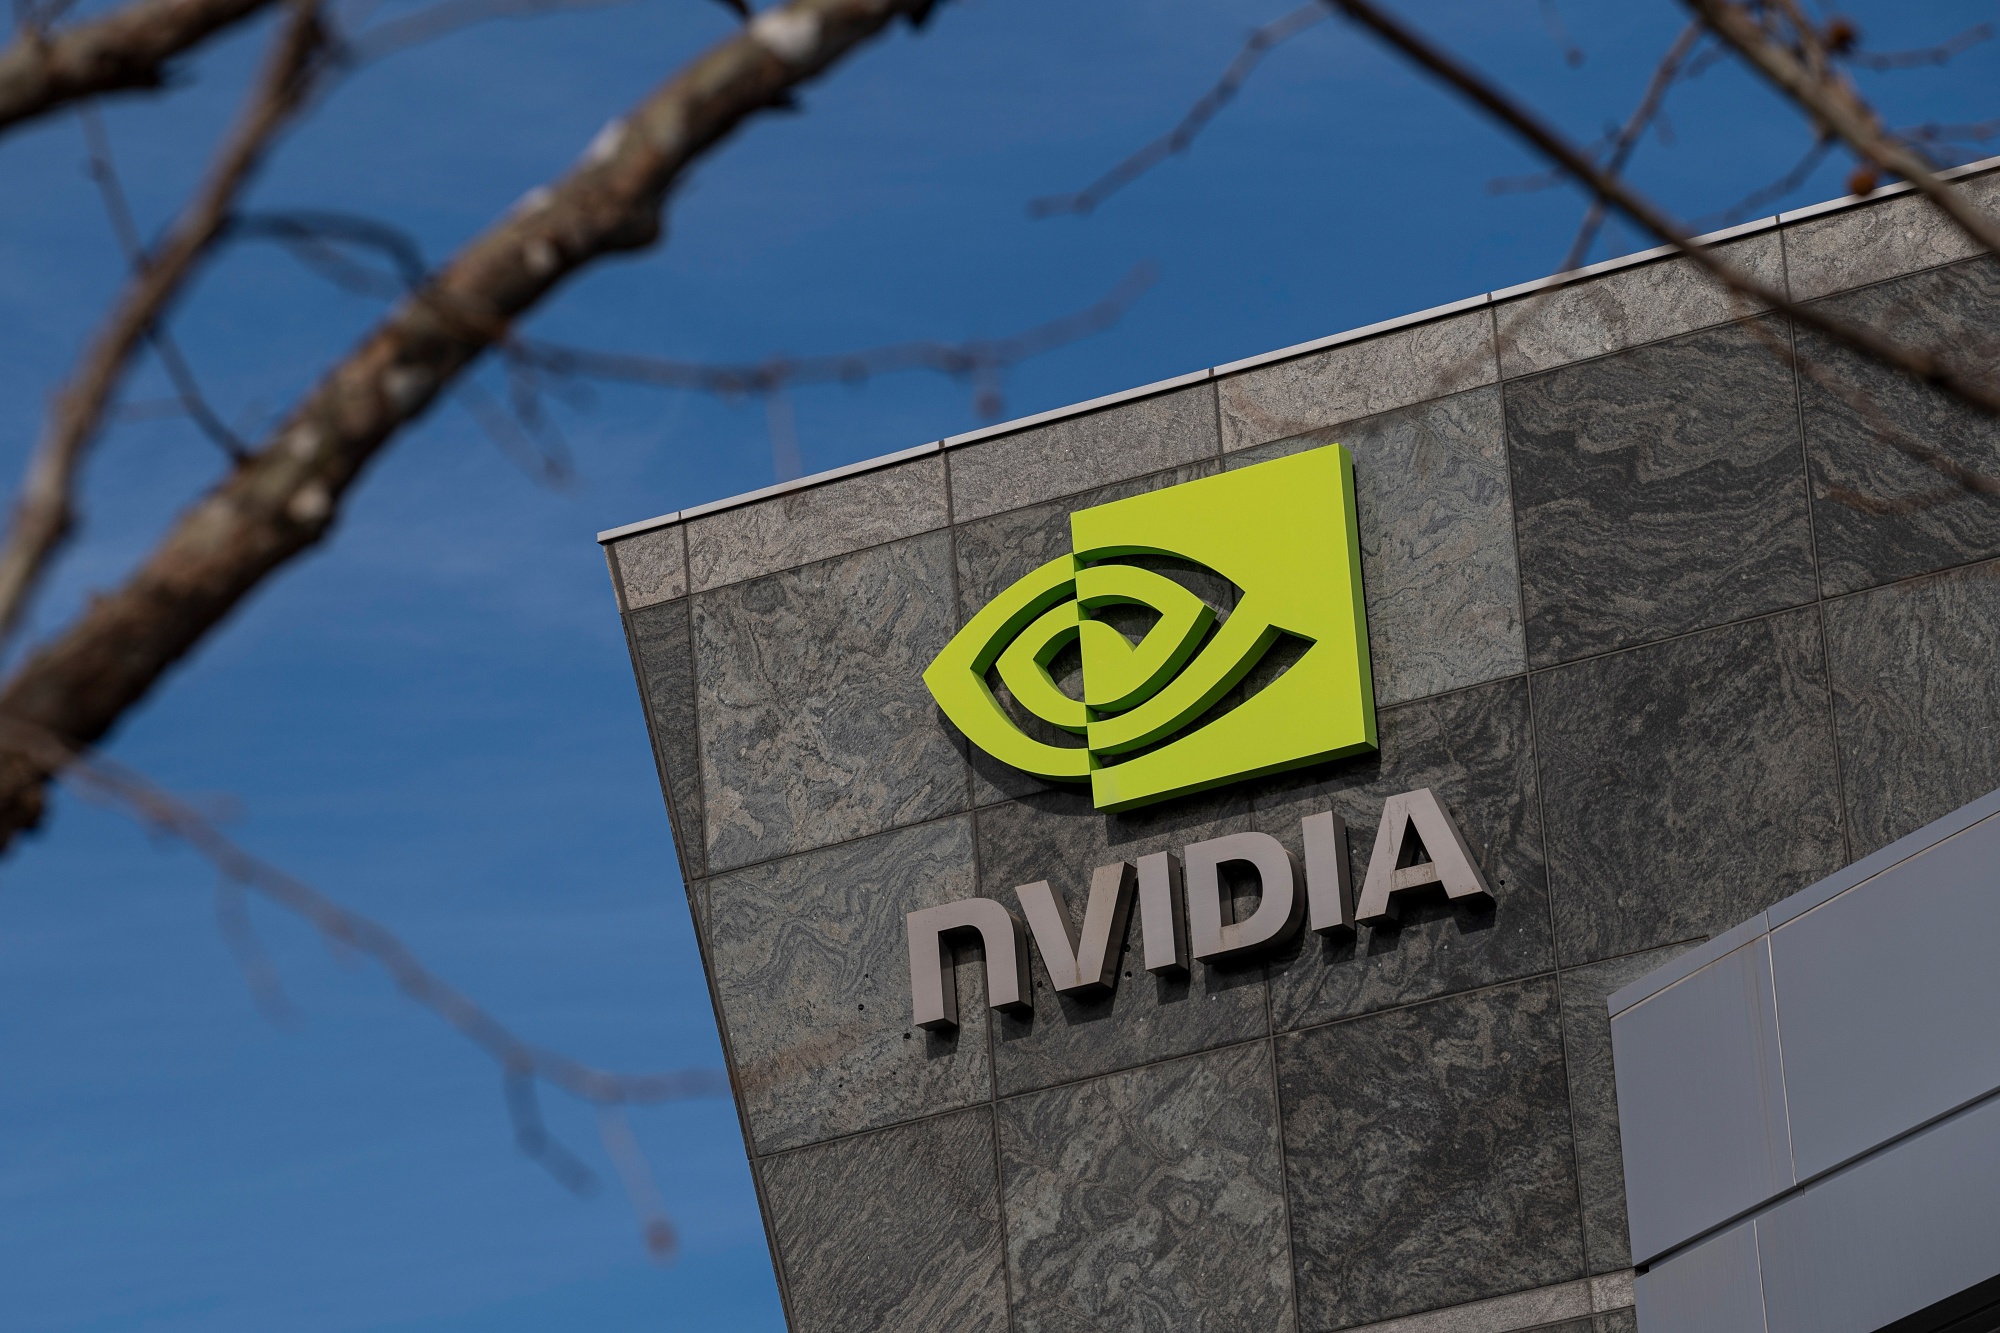 Nvidia Shares Surge After CEO Shares Vision of Data Center